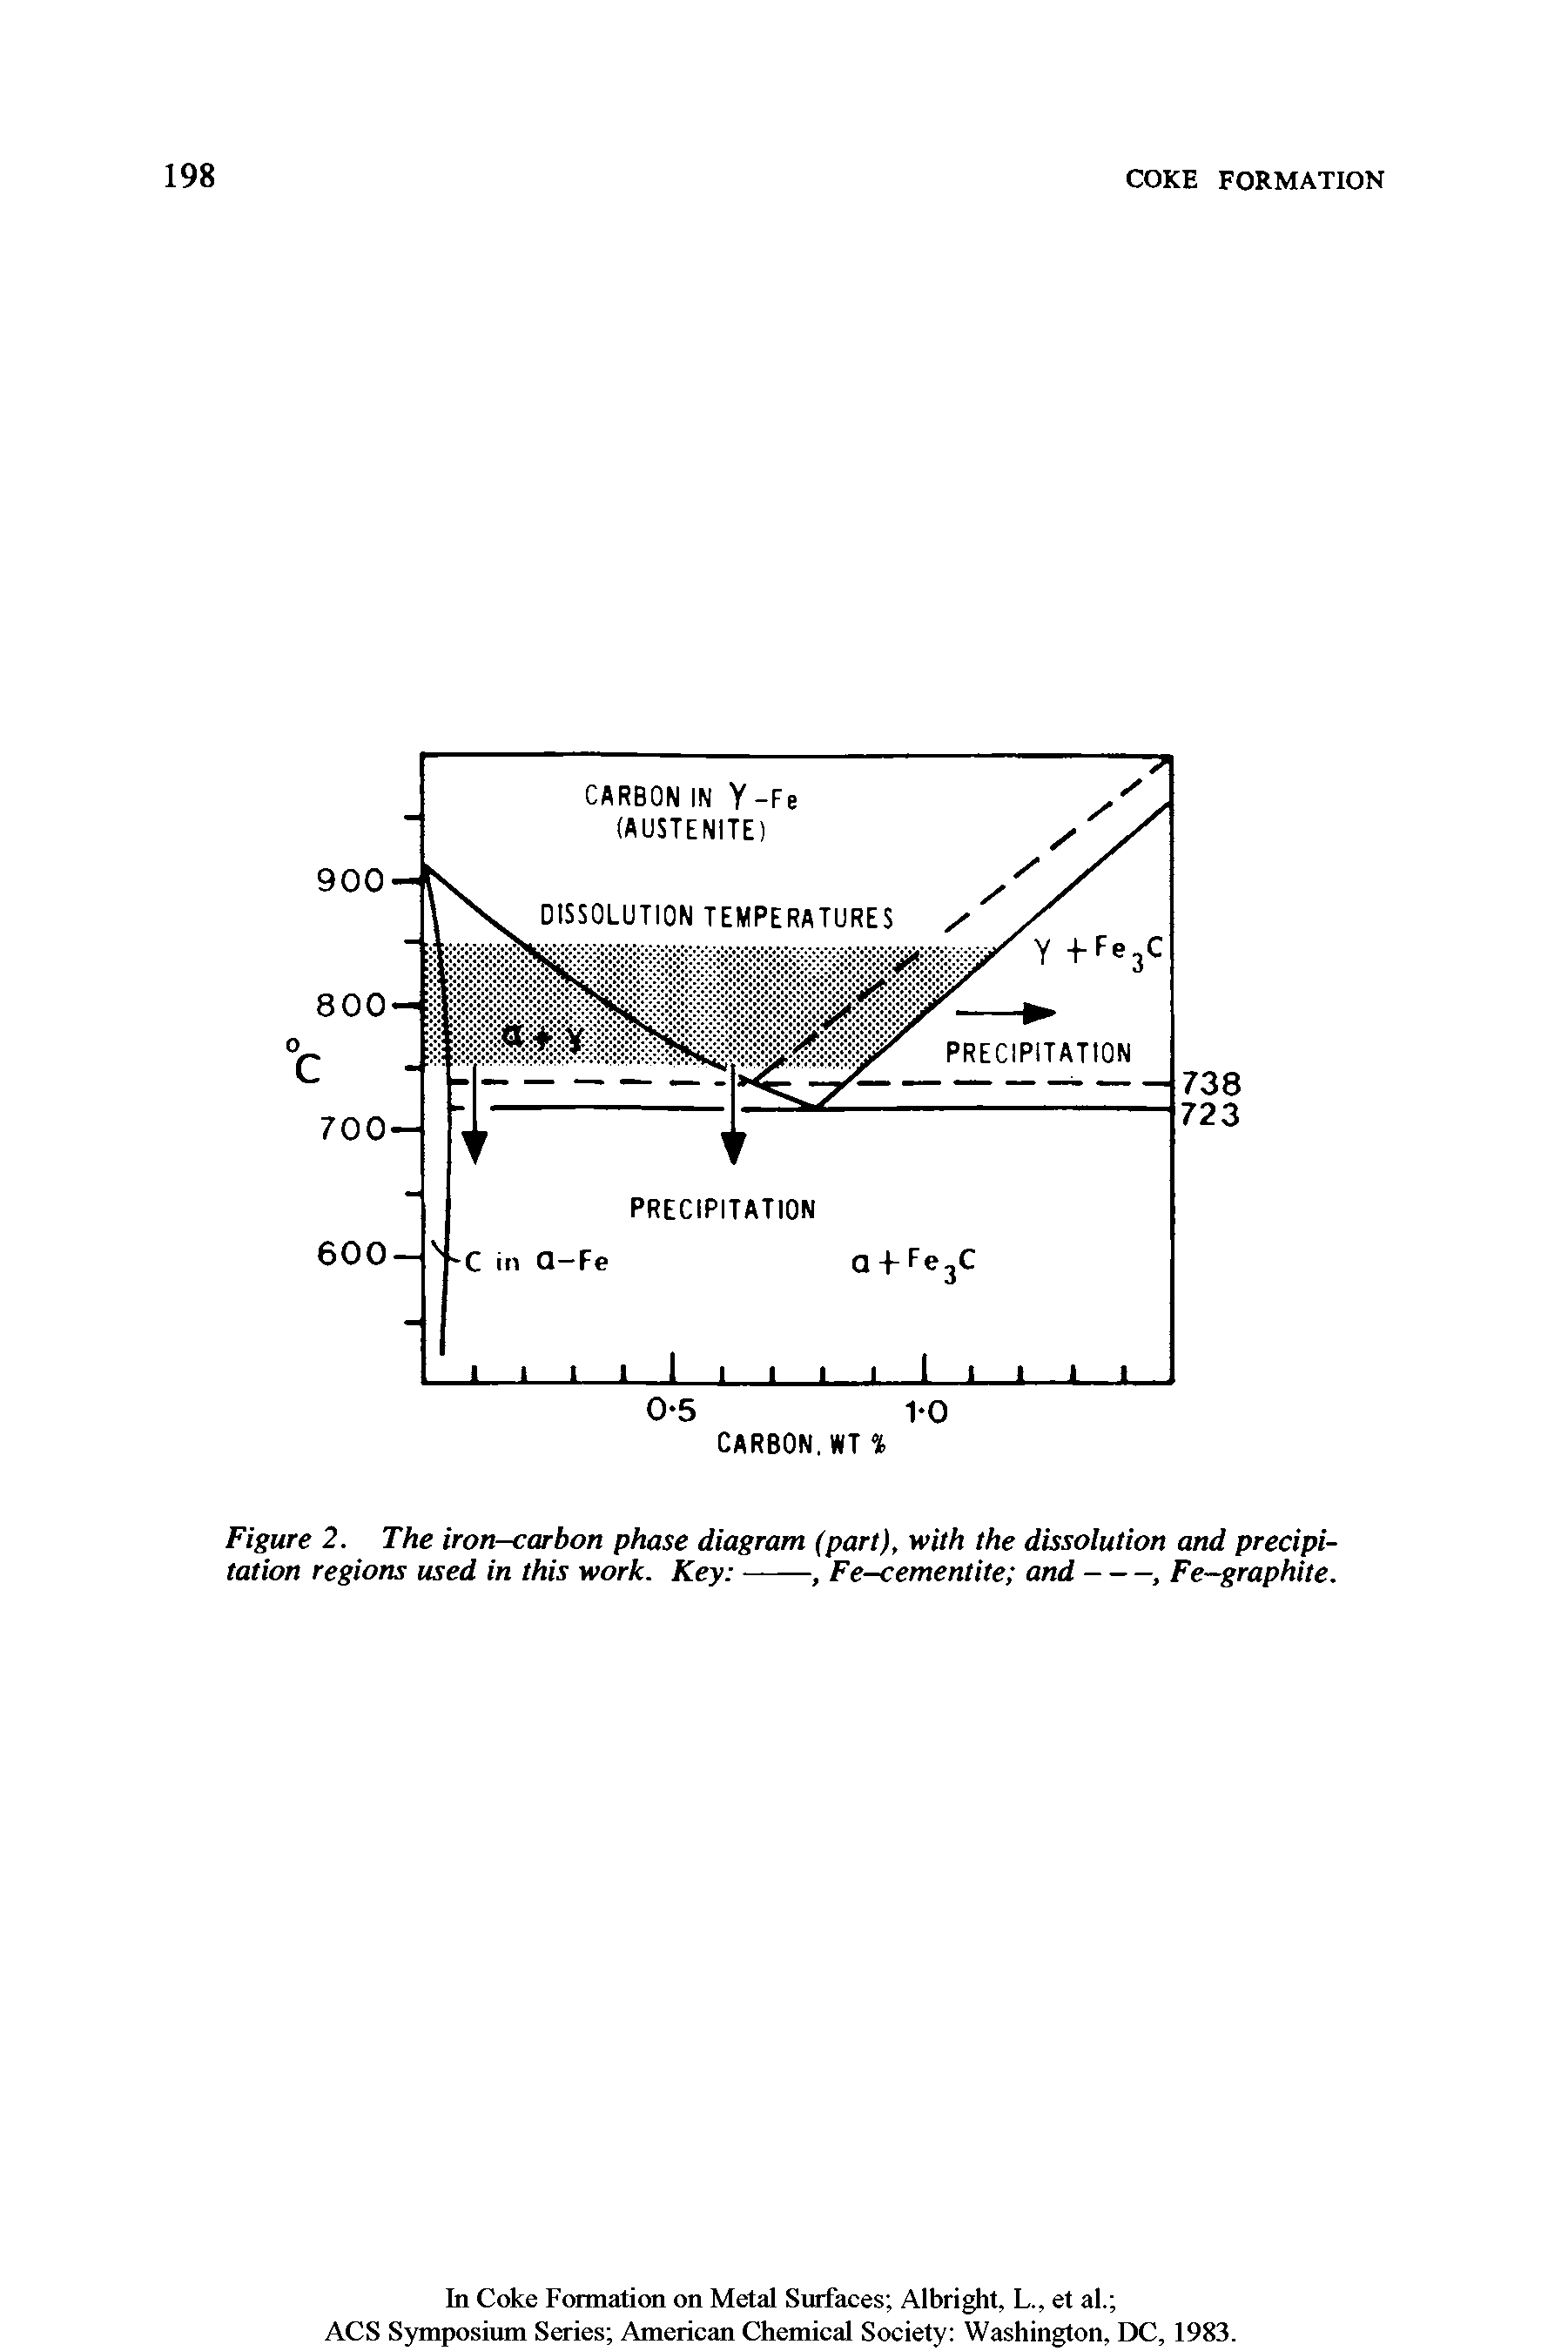 Figure 2. The iron-carbon phase diagram (part), with the dissolution and precipitation regions used in this work. Key ---, Fe-cementite and-----, Fe-graphite.